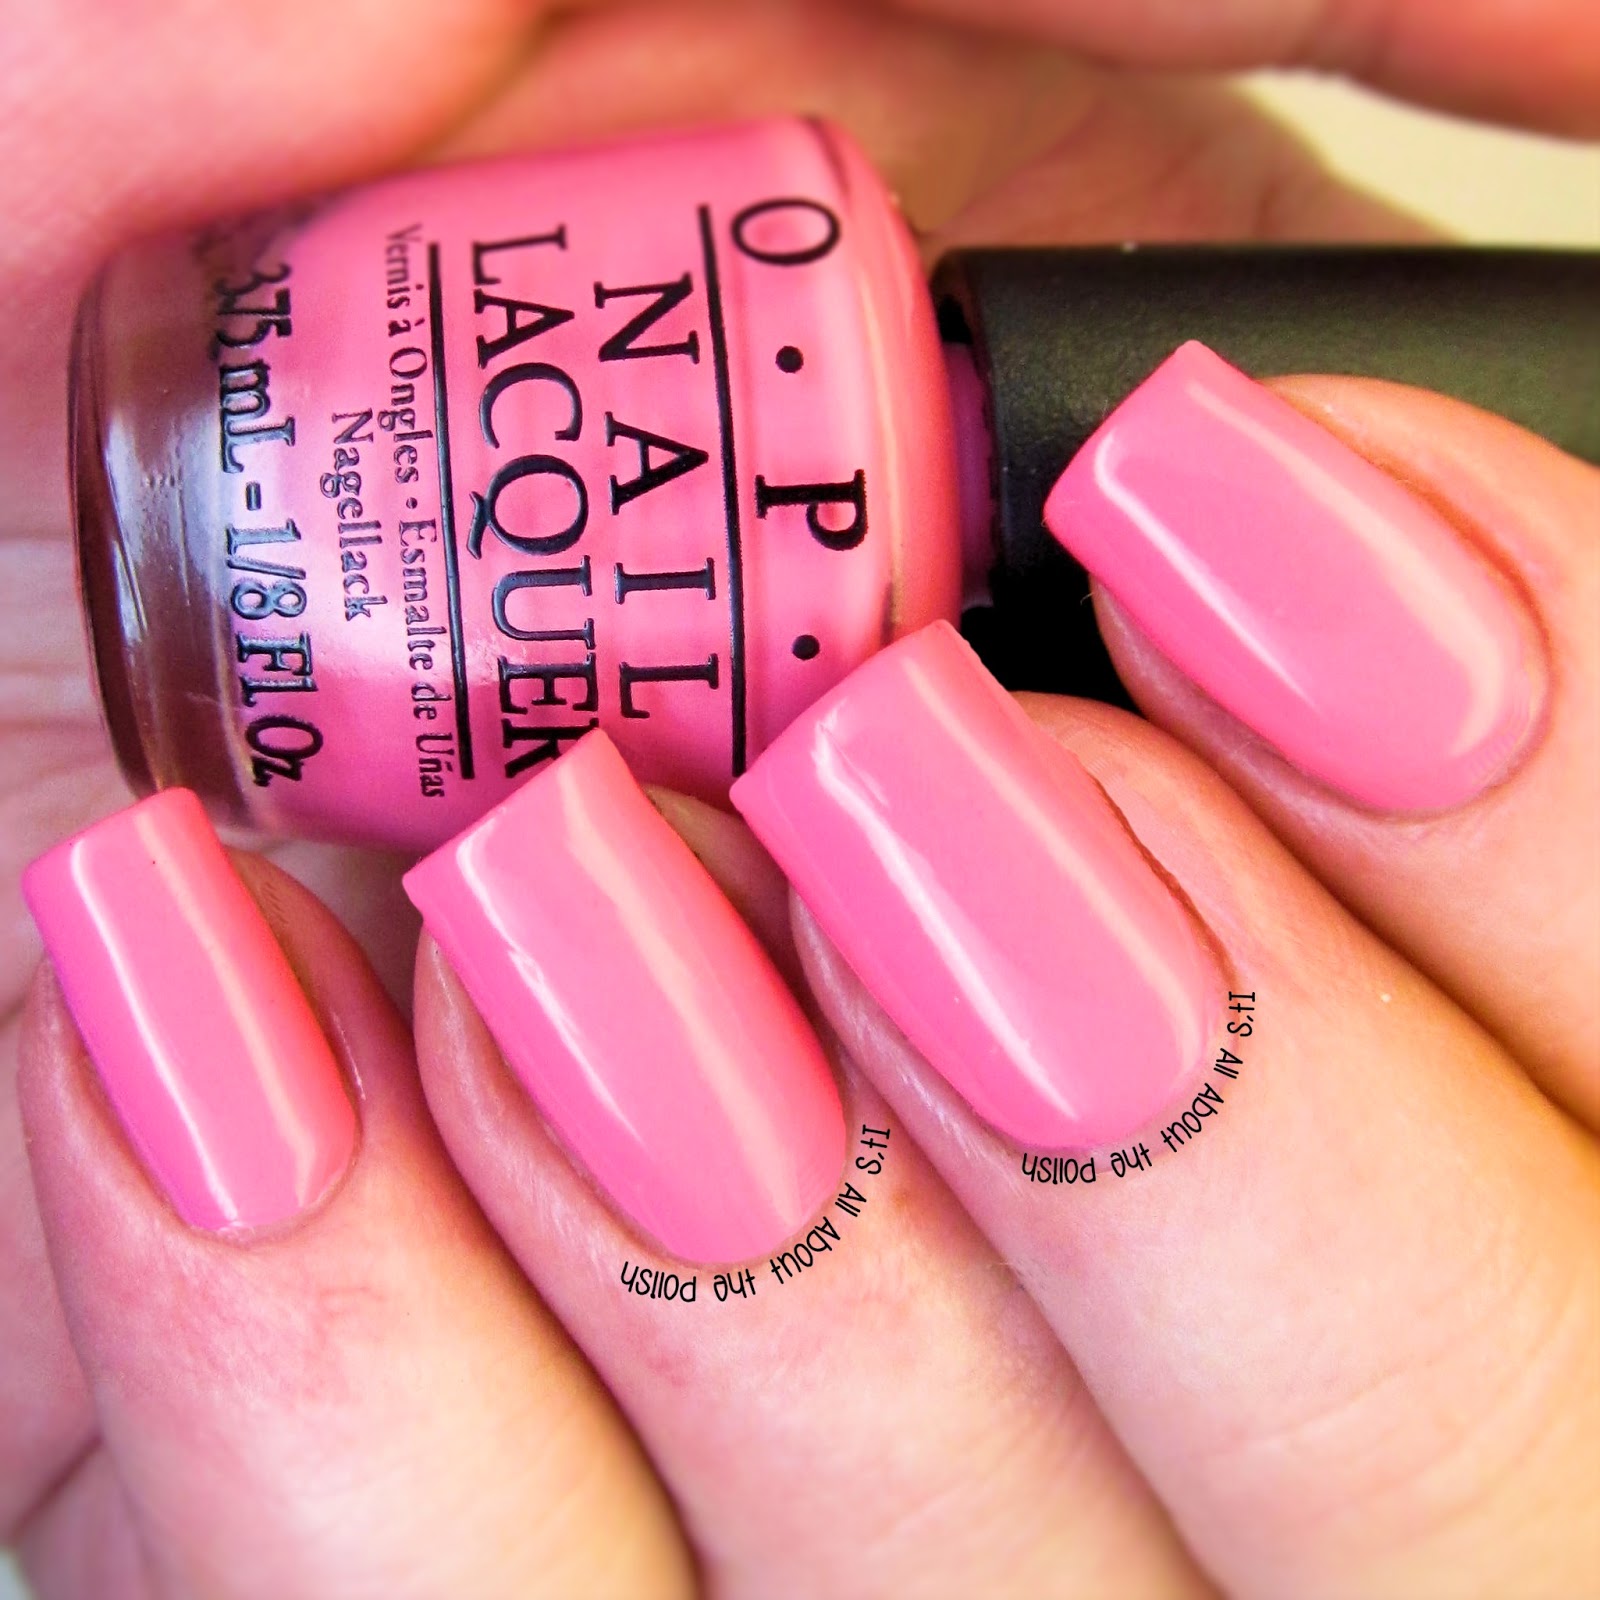 It's all about the polish: OPI Copacababies - Mini Pack review